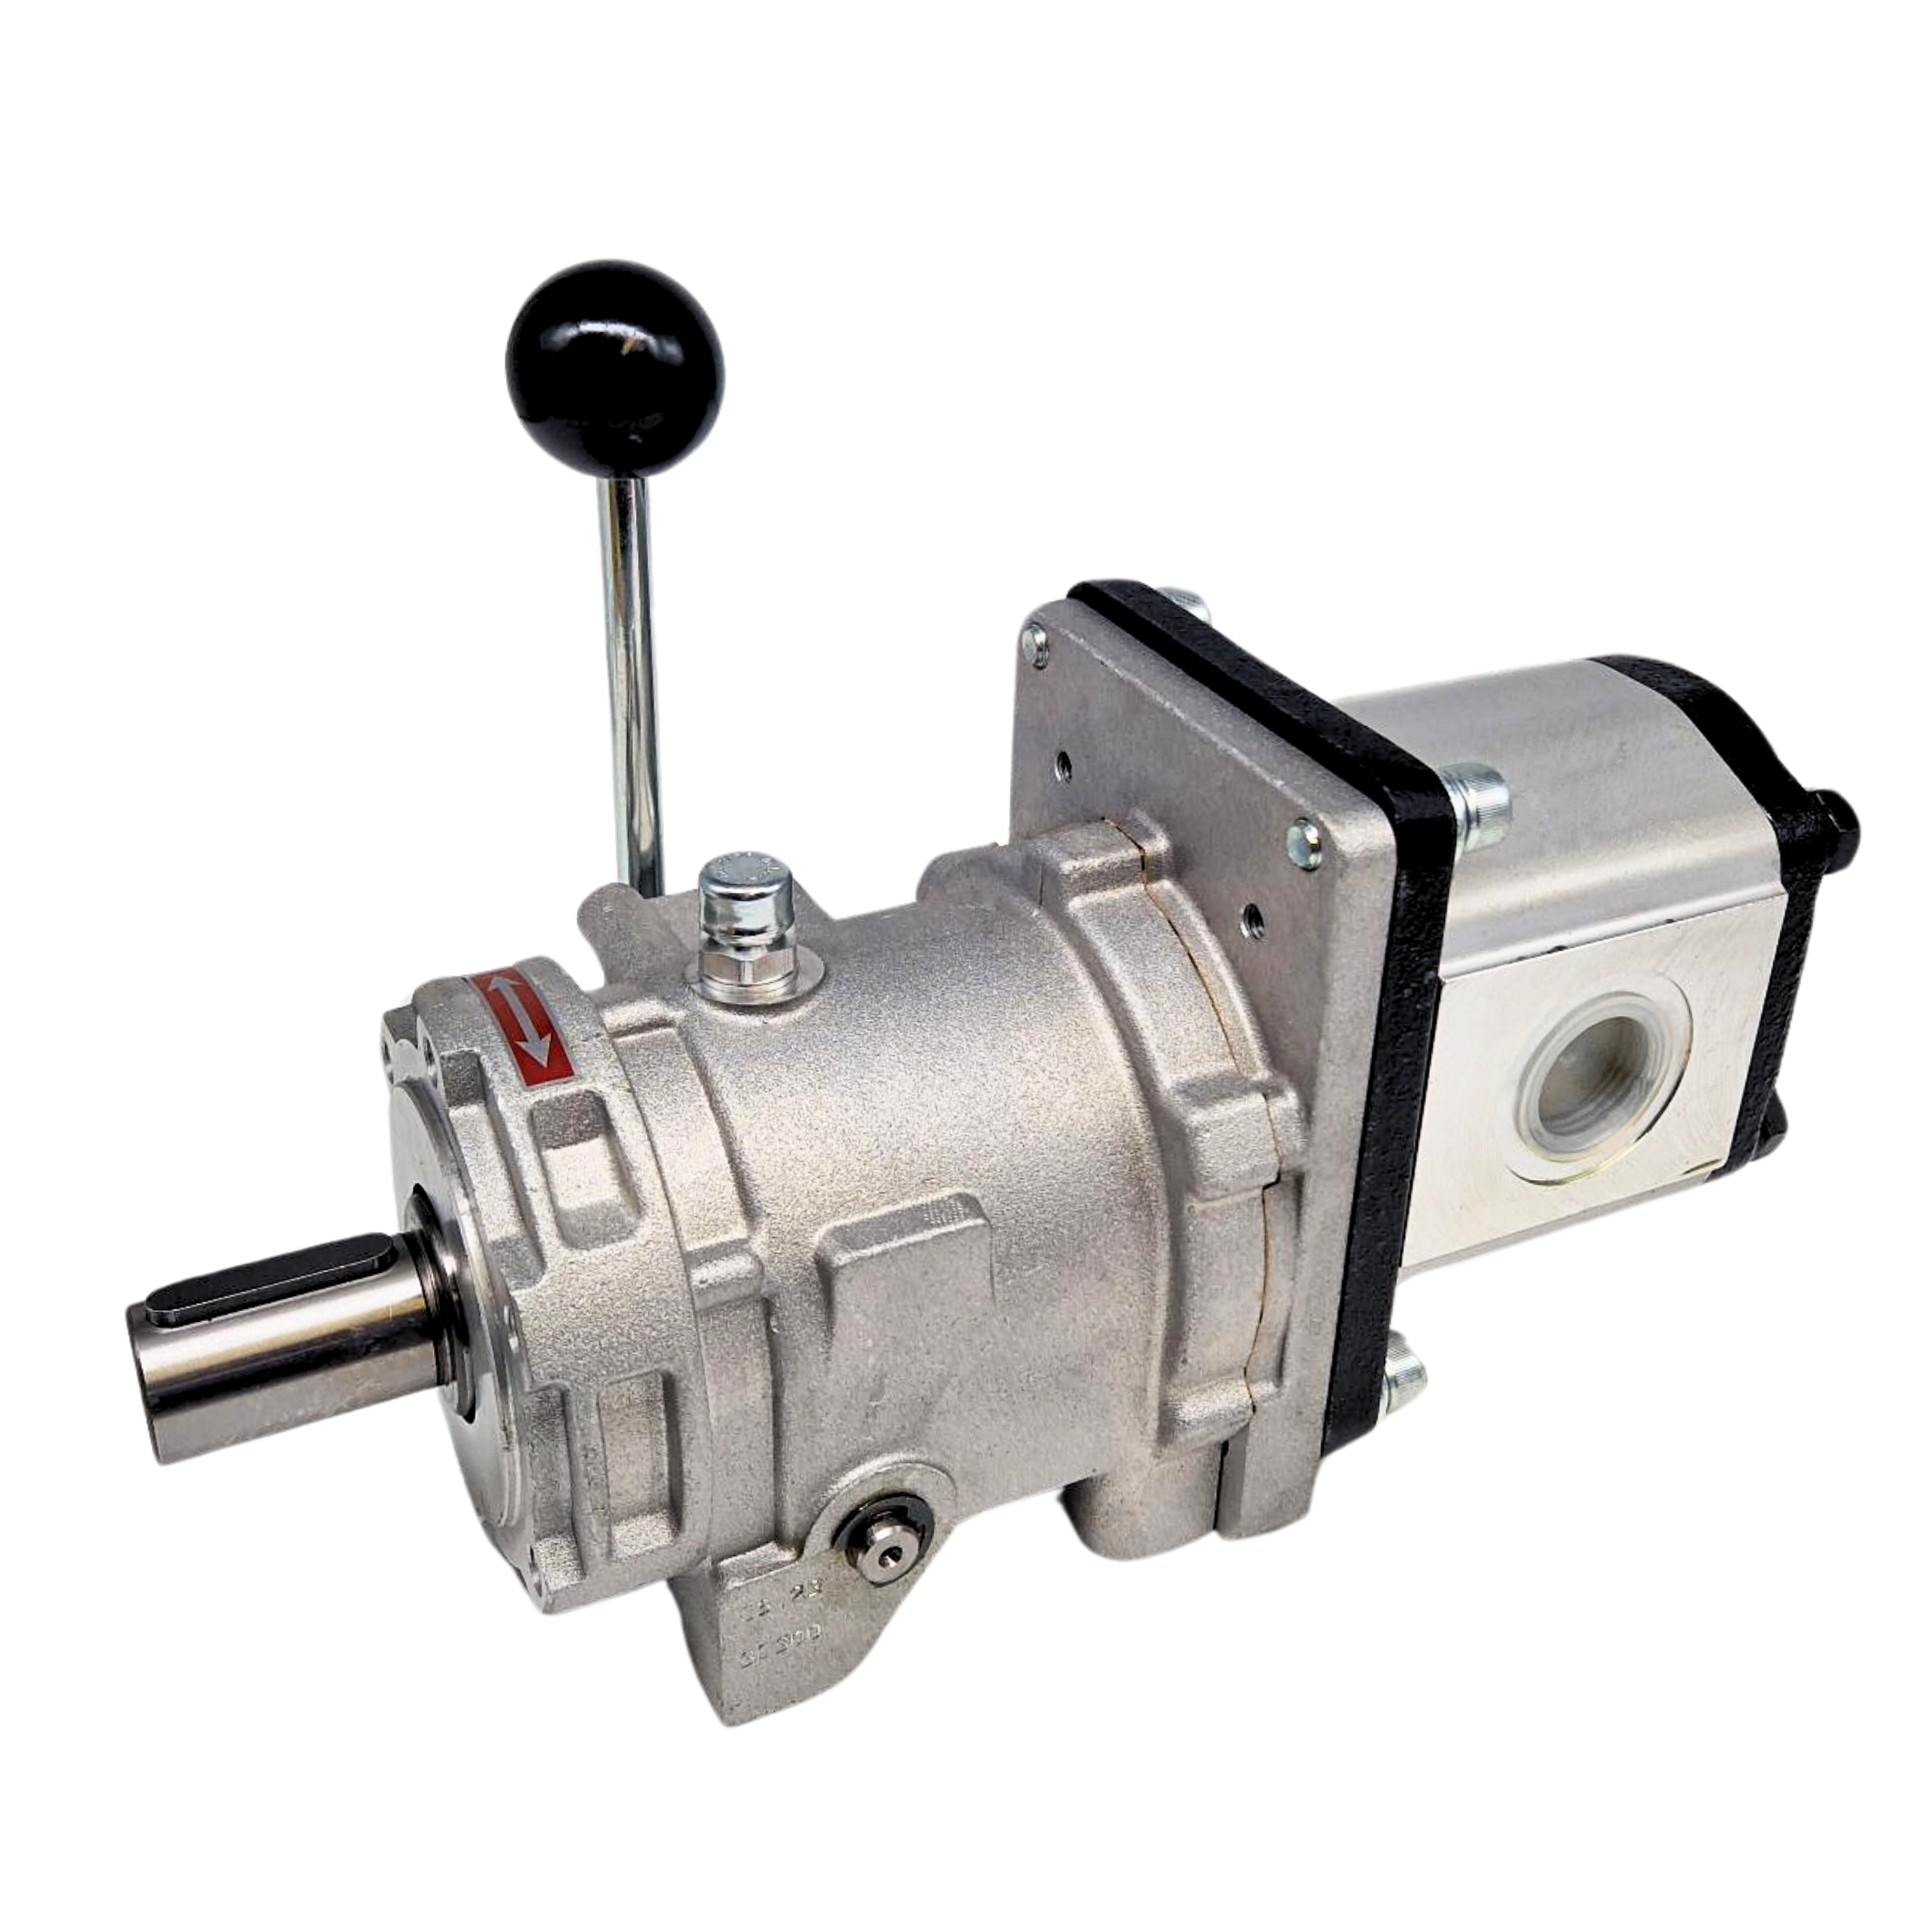 Flowfit Group 3, Hydraulic Mechanical Clutch and Pump Assembly, 26cc, 46.8 L/Min, 1800RPM